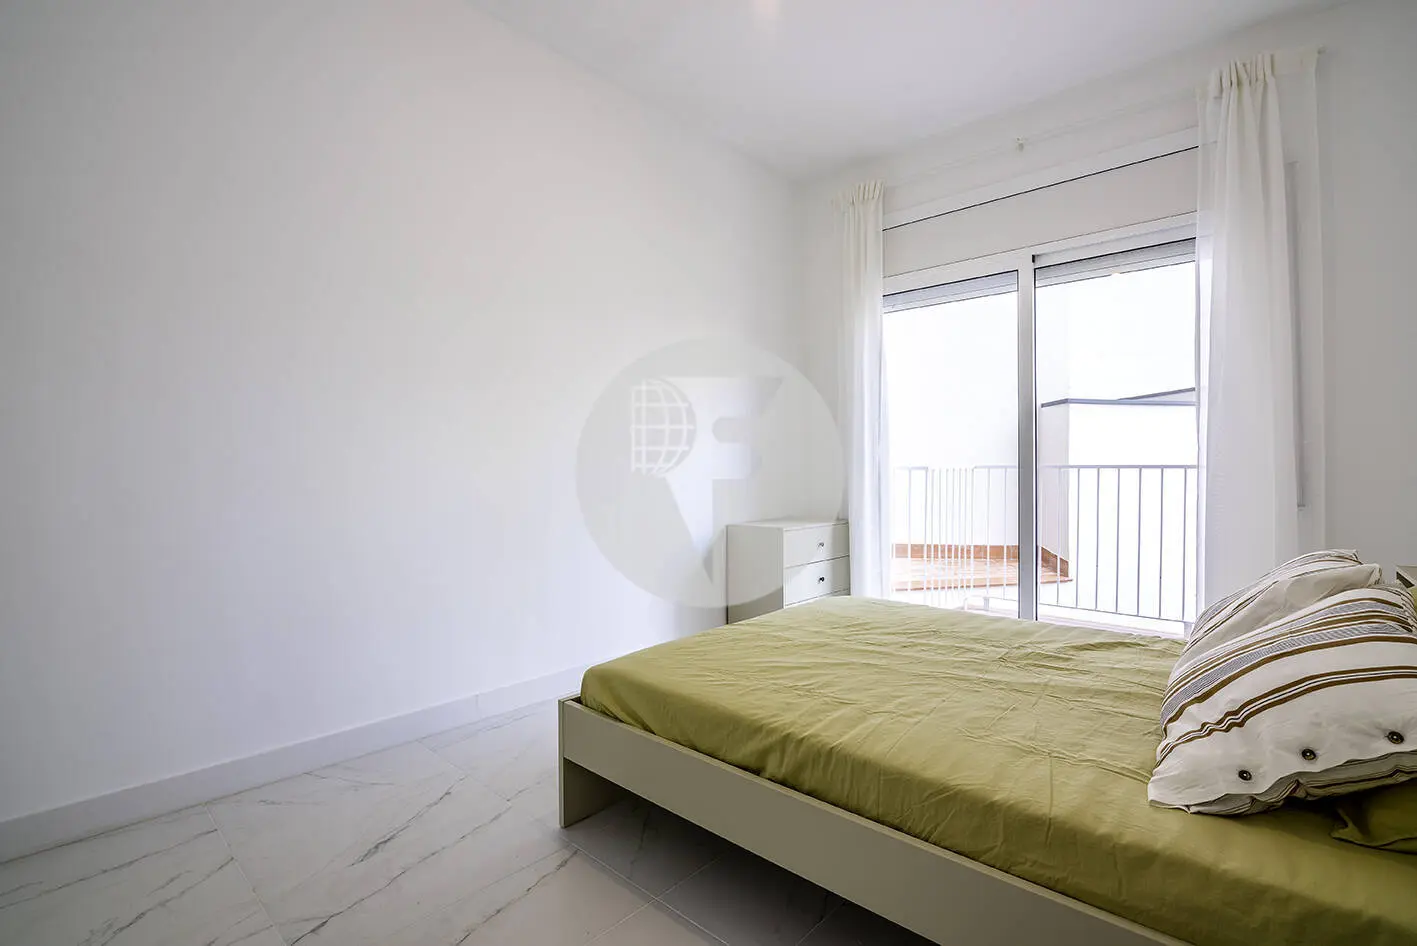 Brand new completely renovated apartment on Aragó street in the heart of El Clot in Barcelona. 31